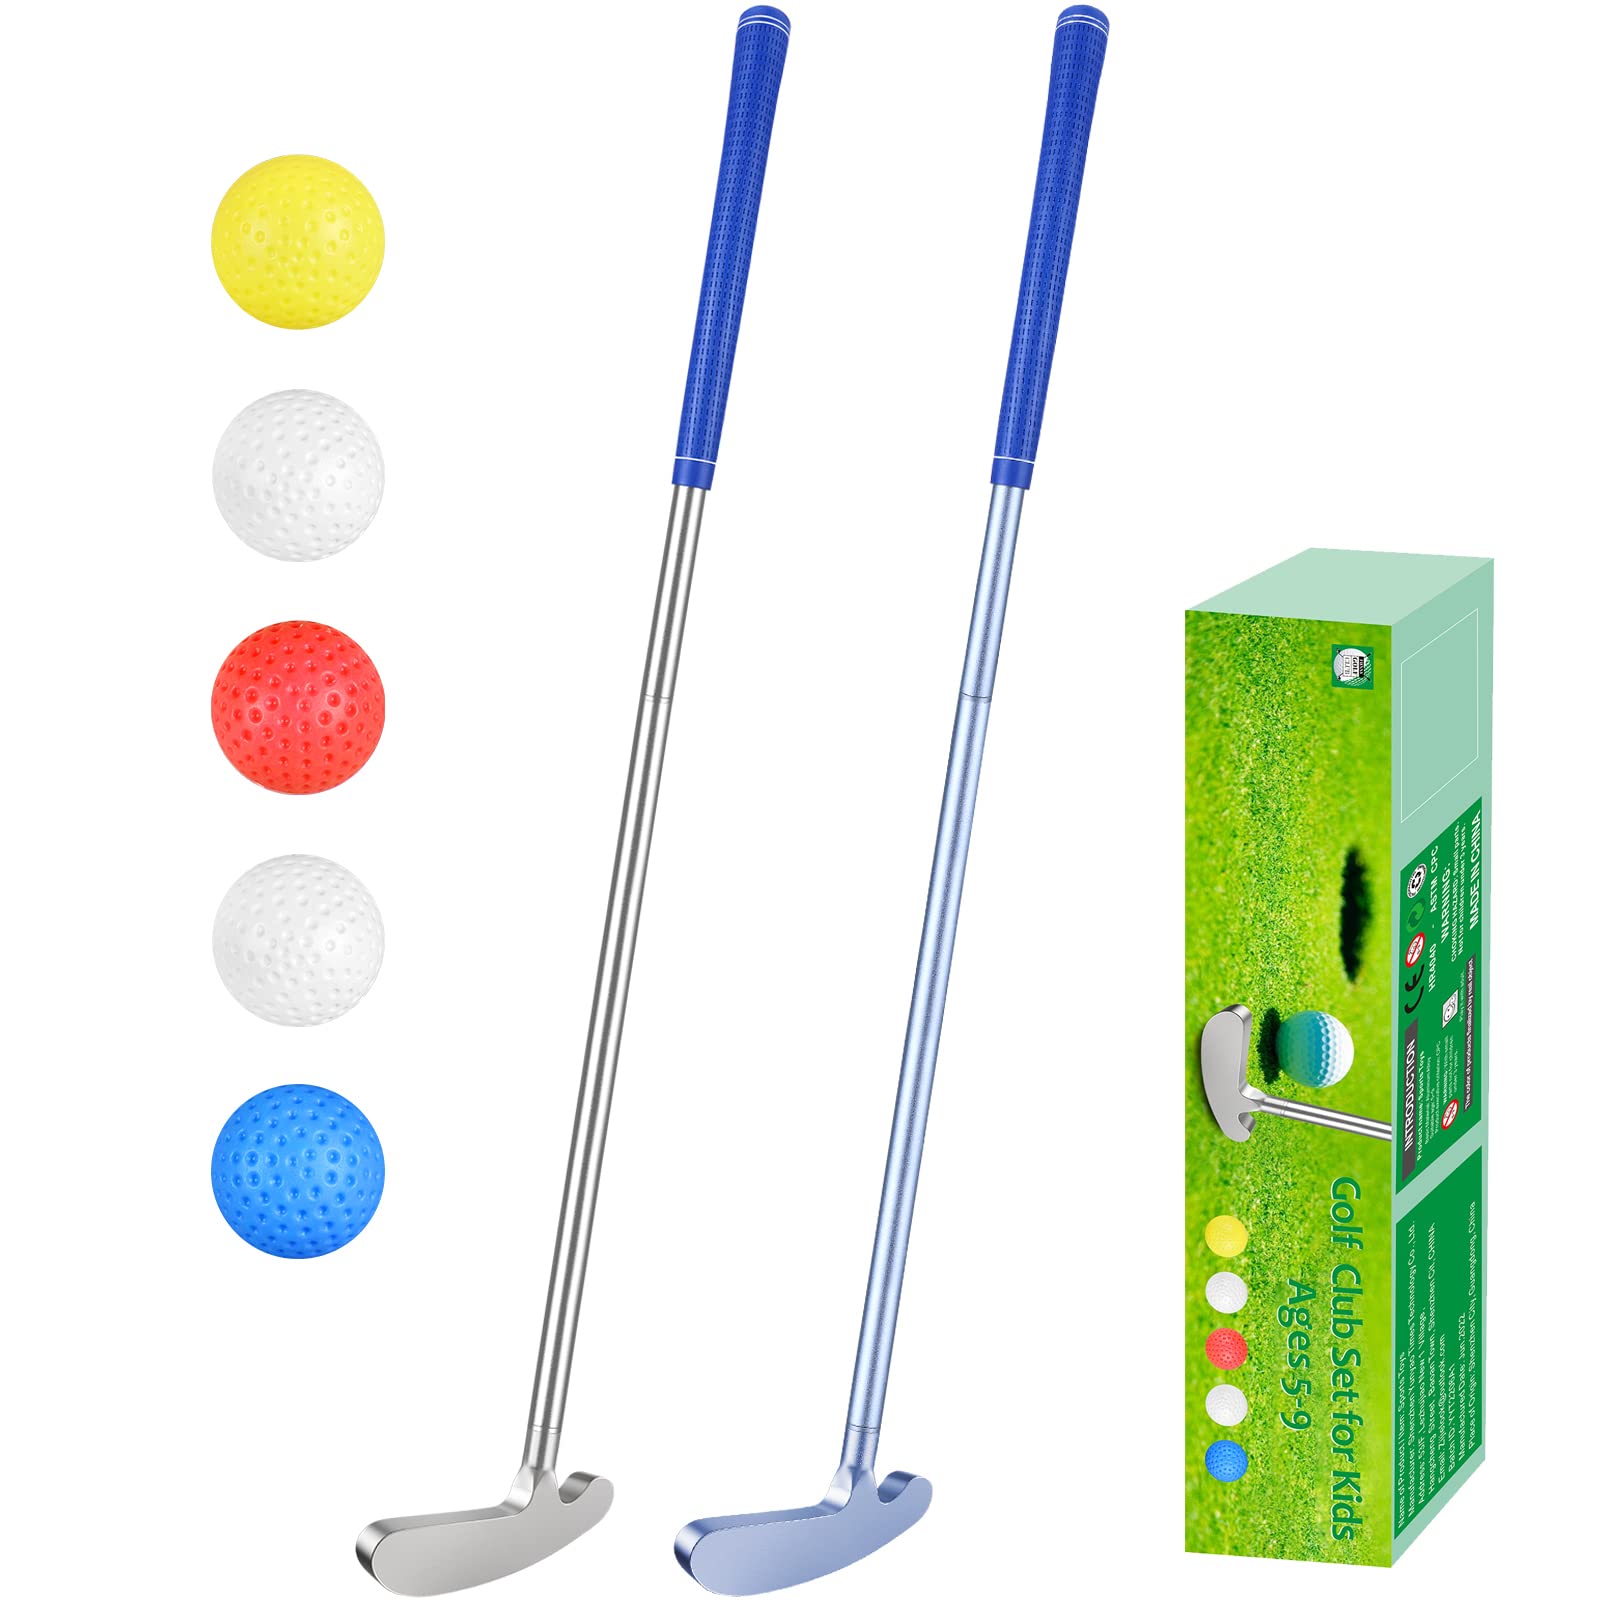 Wassteel Kids Golf Clubs-6063 Aluminum Alloy Golf Putter for Kids Left  Handed Golf Set, Indoor/Outdoor Two - Mini Golf Putters Golf Gifts for 59  Year Old Boys Girls & 5 Plastic Golf